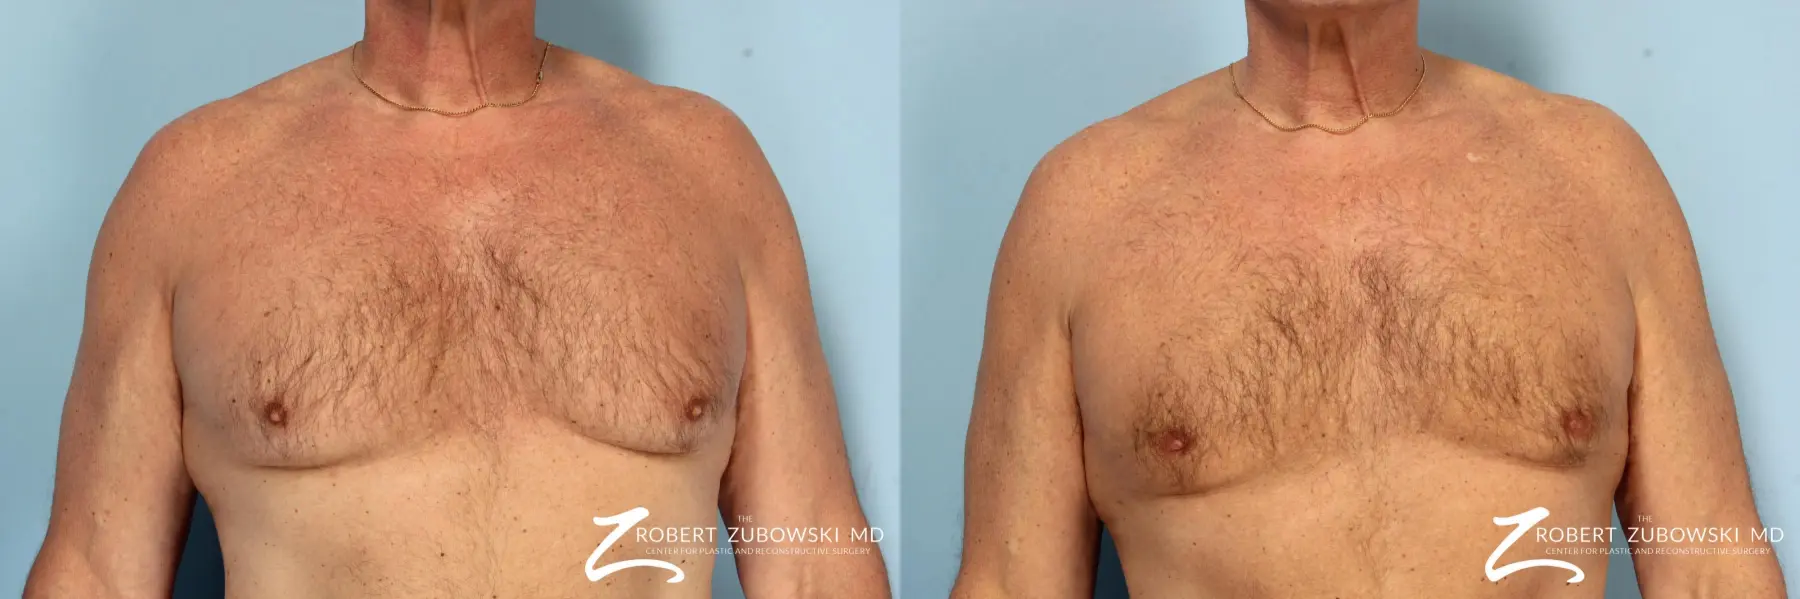 Gynecomastia Before & After Gallery: Patient 8